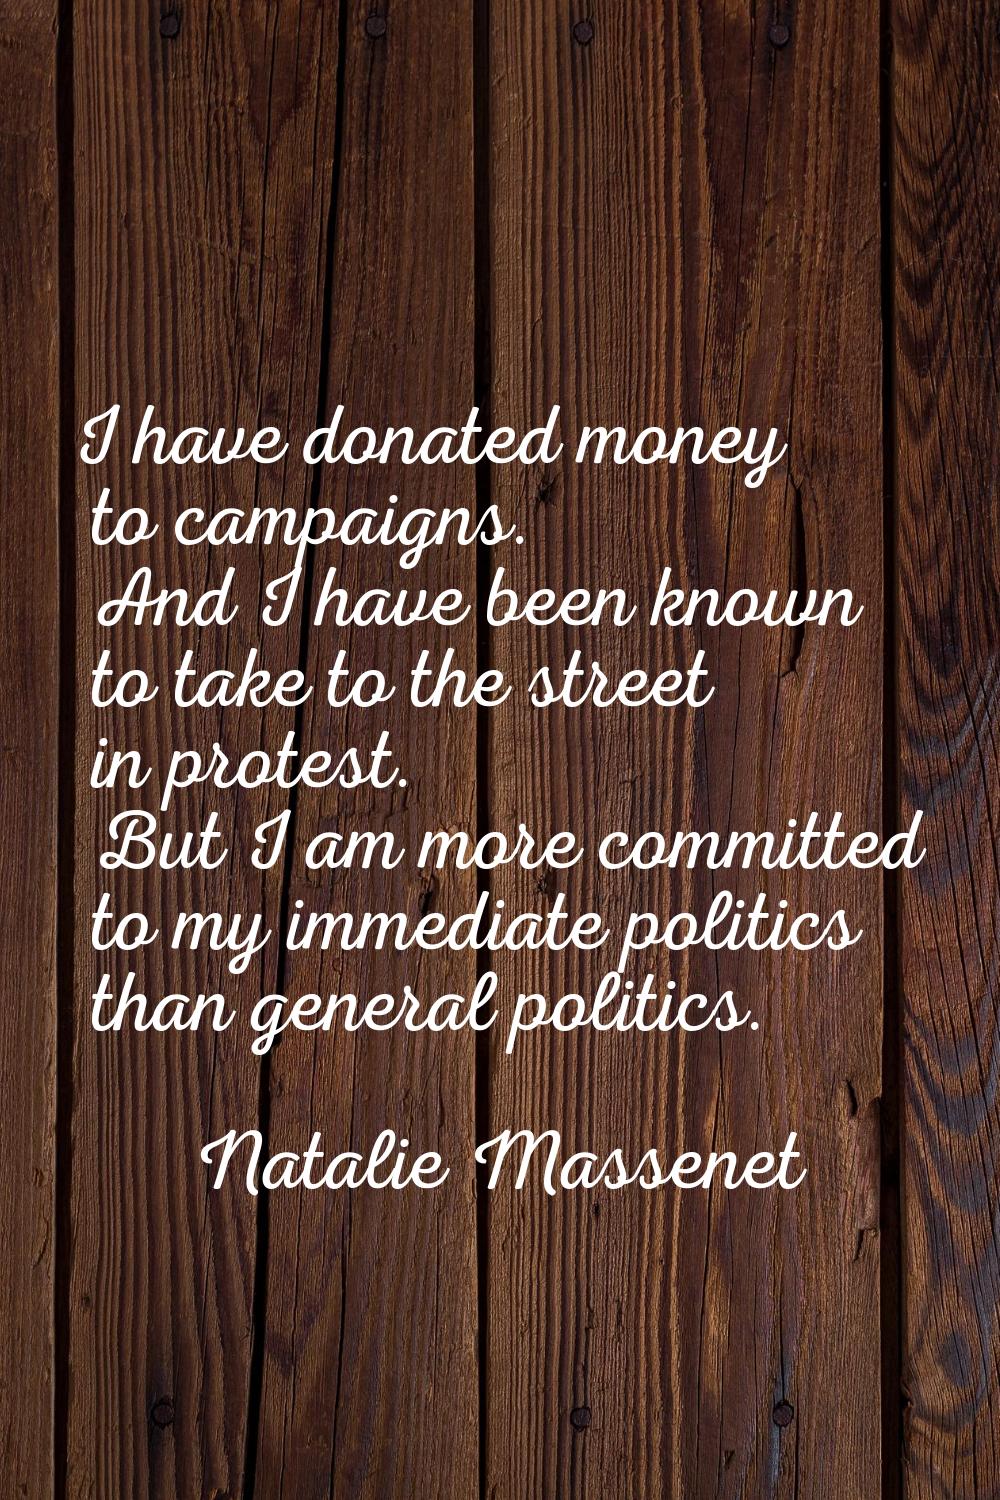 I have donated money to campaigns. And I have been known to take to the street in protest. But I am